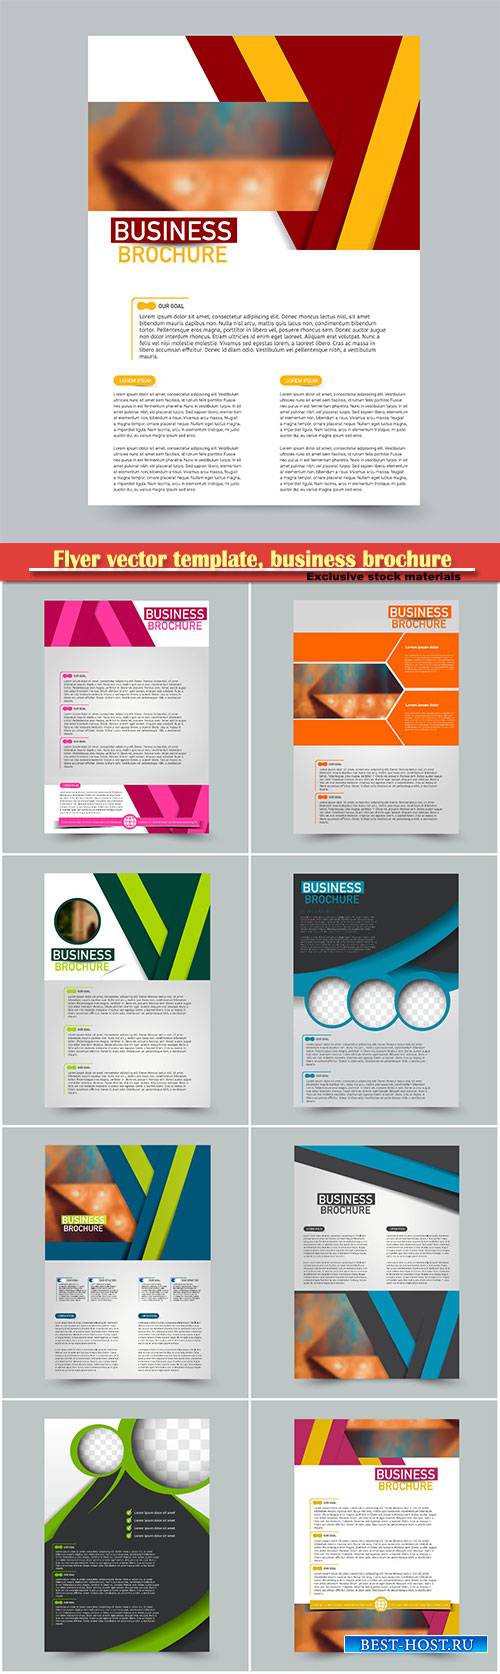 Flyer vector template, business brochure, magazine cover # 7